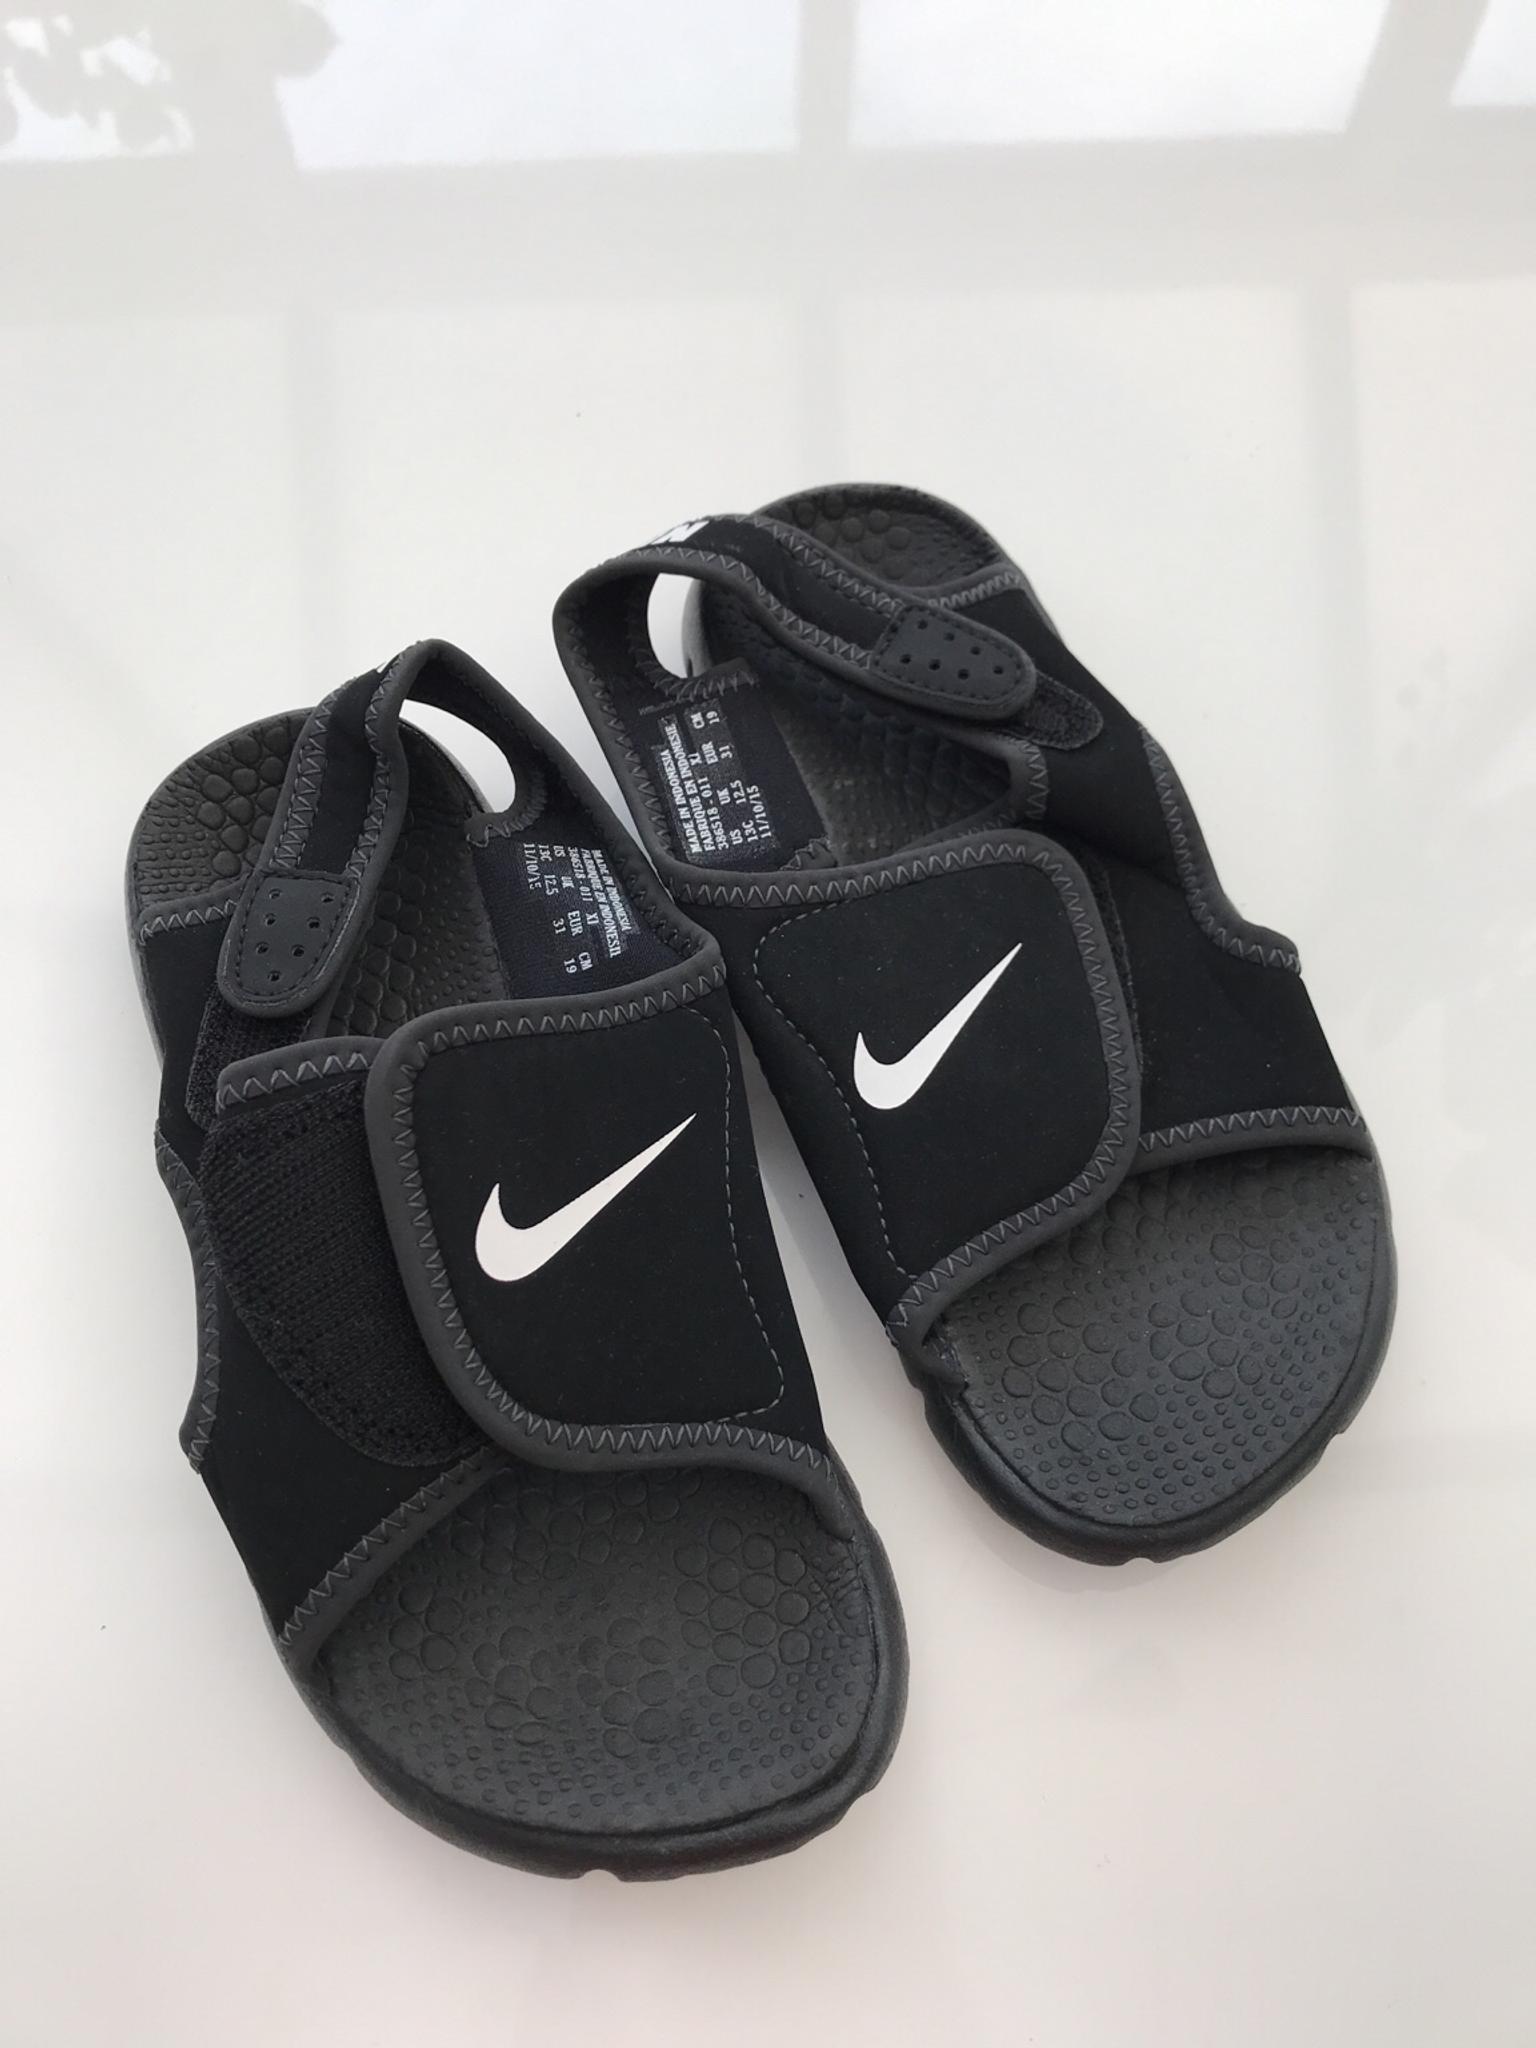 nike baby sandals size 5